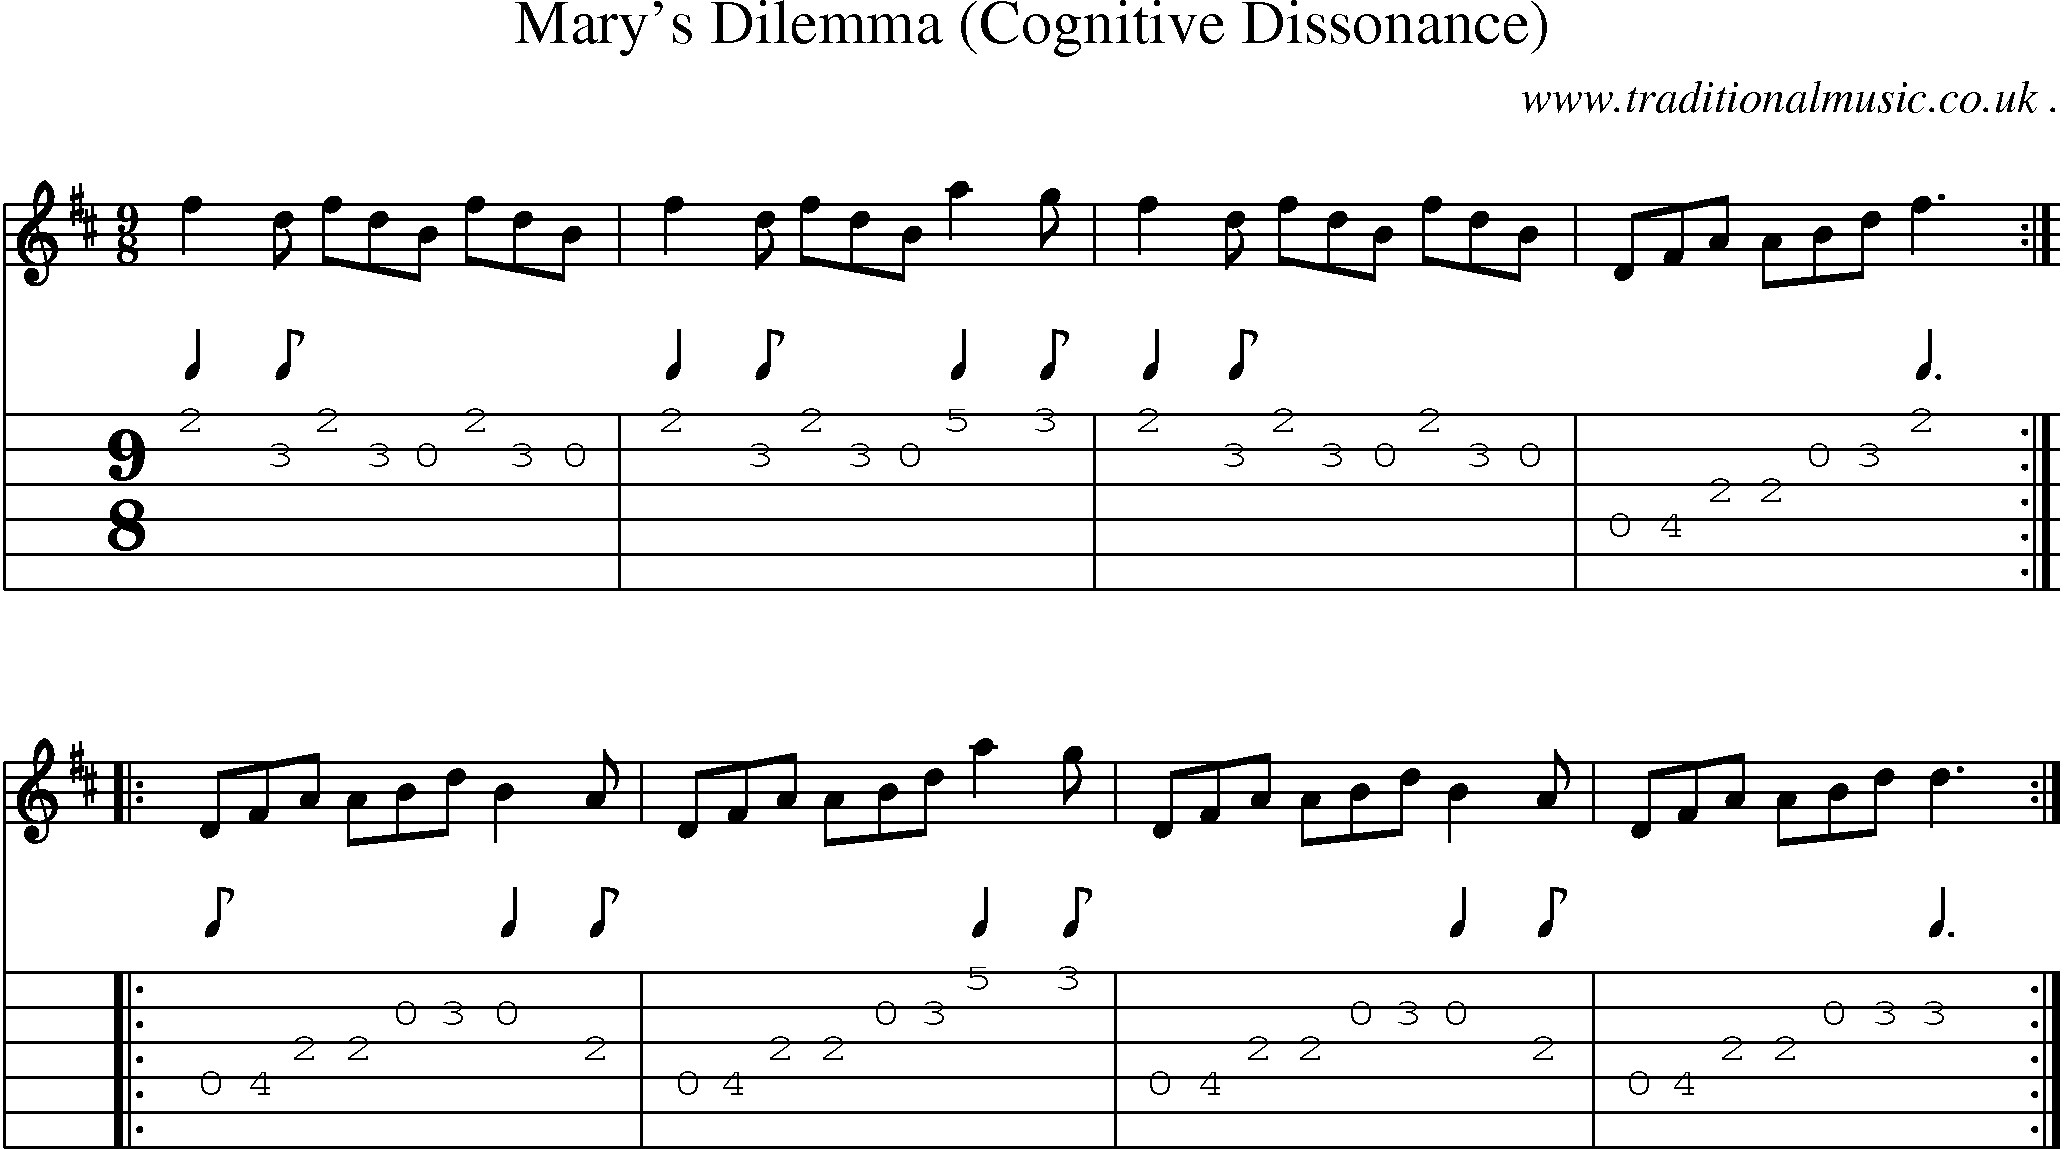 Sheet-Music and Guitar Tabs for Marys Dilemma (cognitive Dissonance)